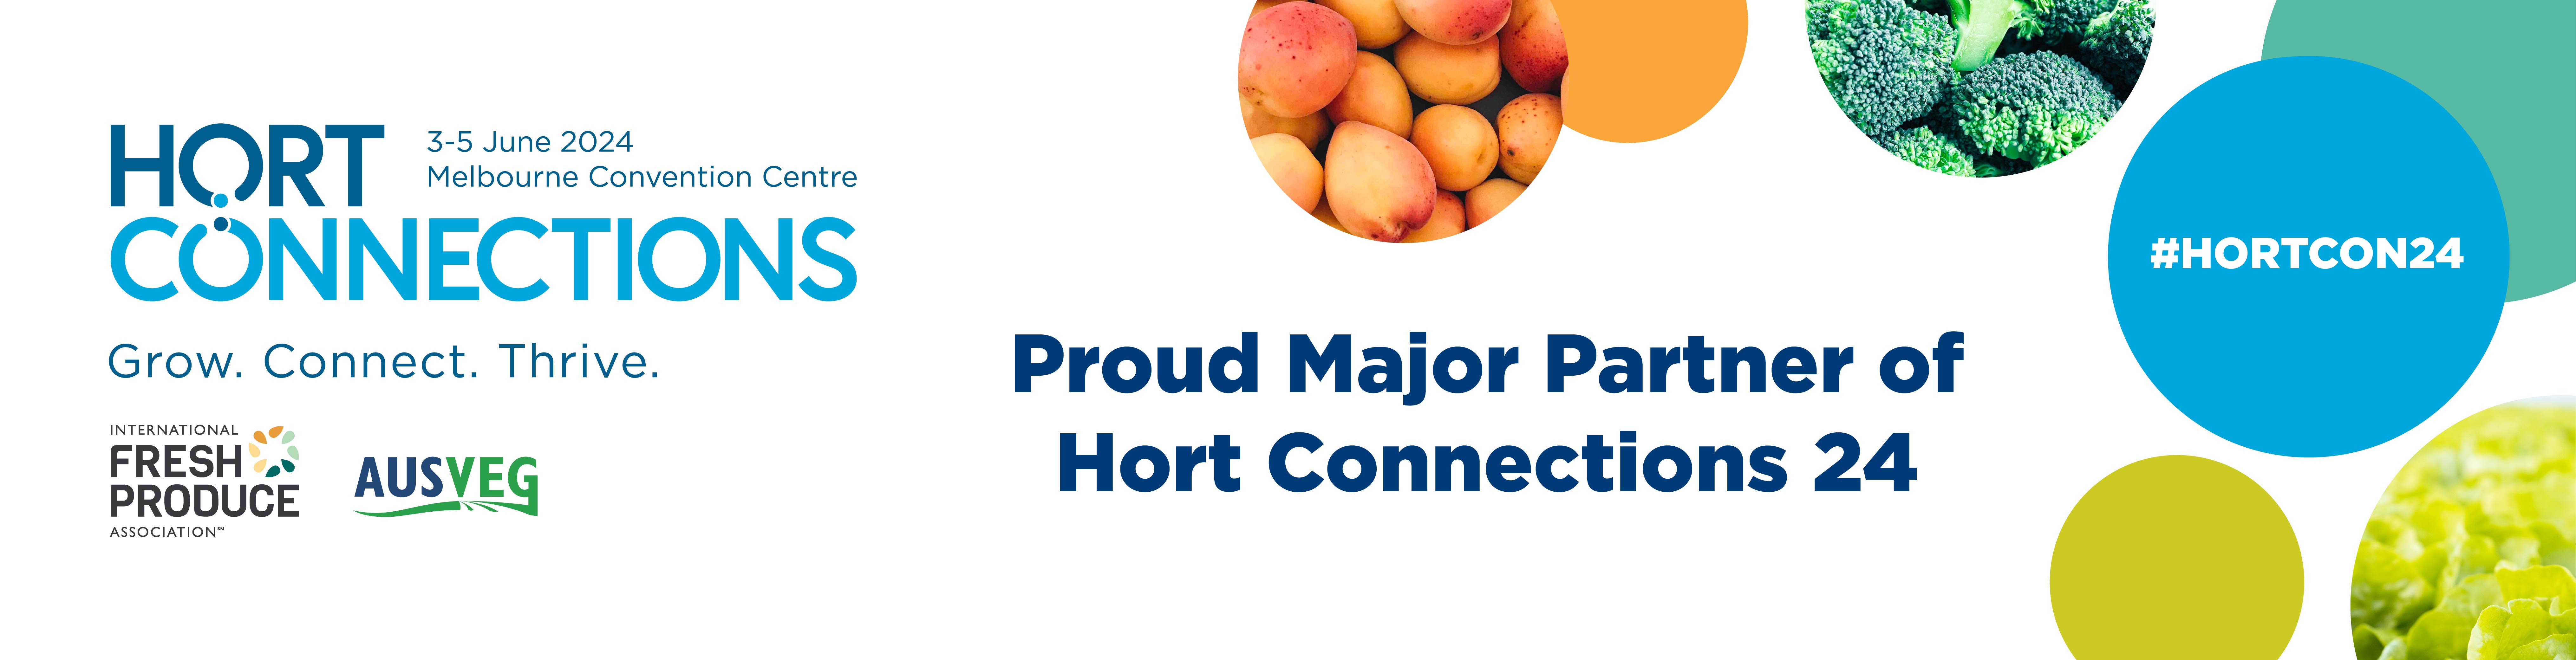 Hort Connections Grower Funding 